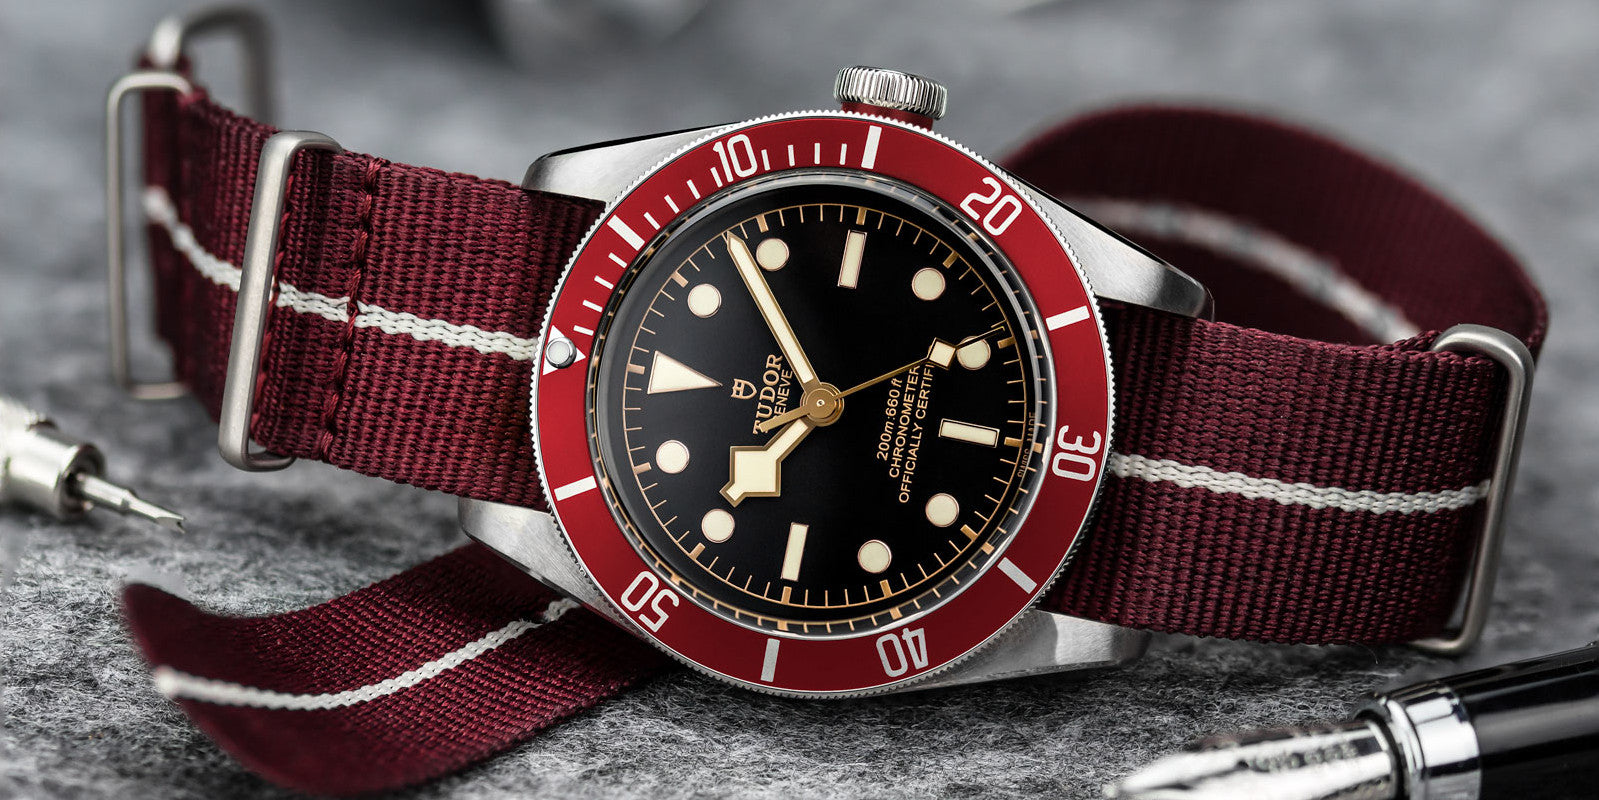 Revisiting the ZULUDIVER Marine Nationale watch strap